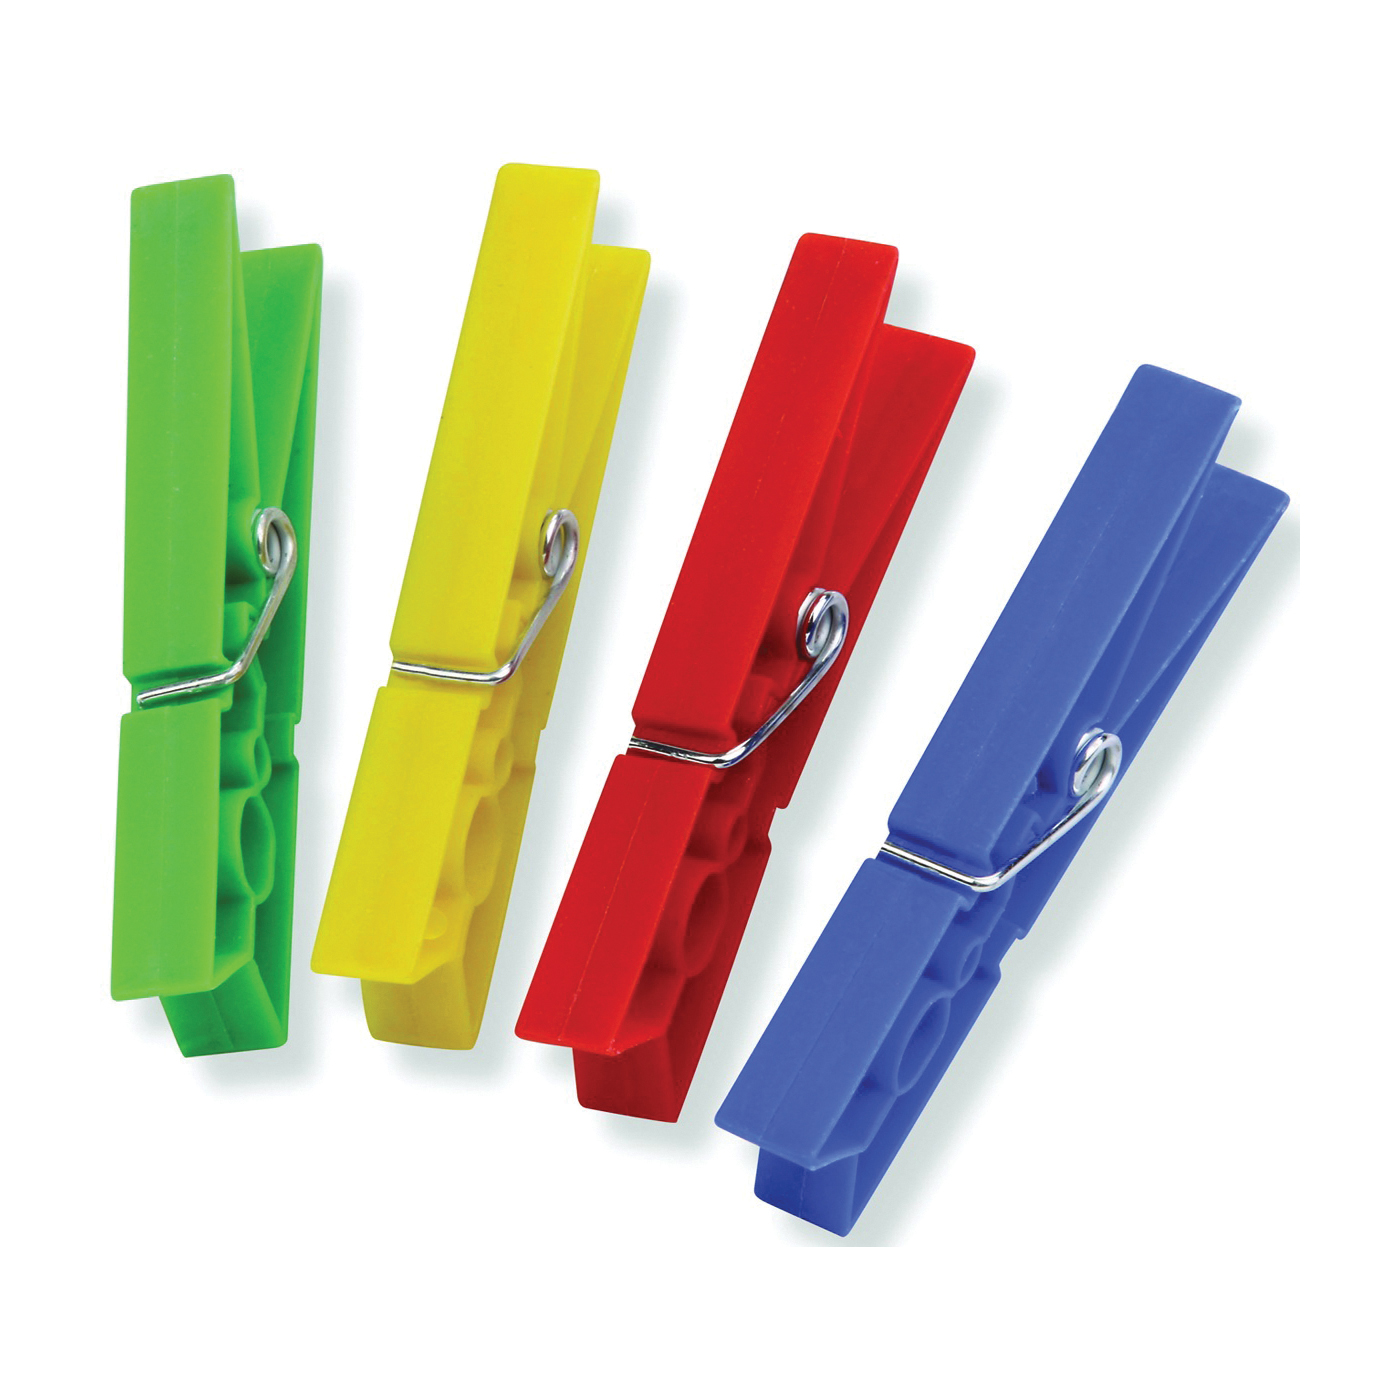 DRY-01410 Classic Clothespin, 0.79 in W, 3.31 in L, Plastic, Blue/Green/Red/Yellow